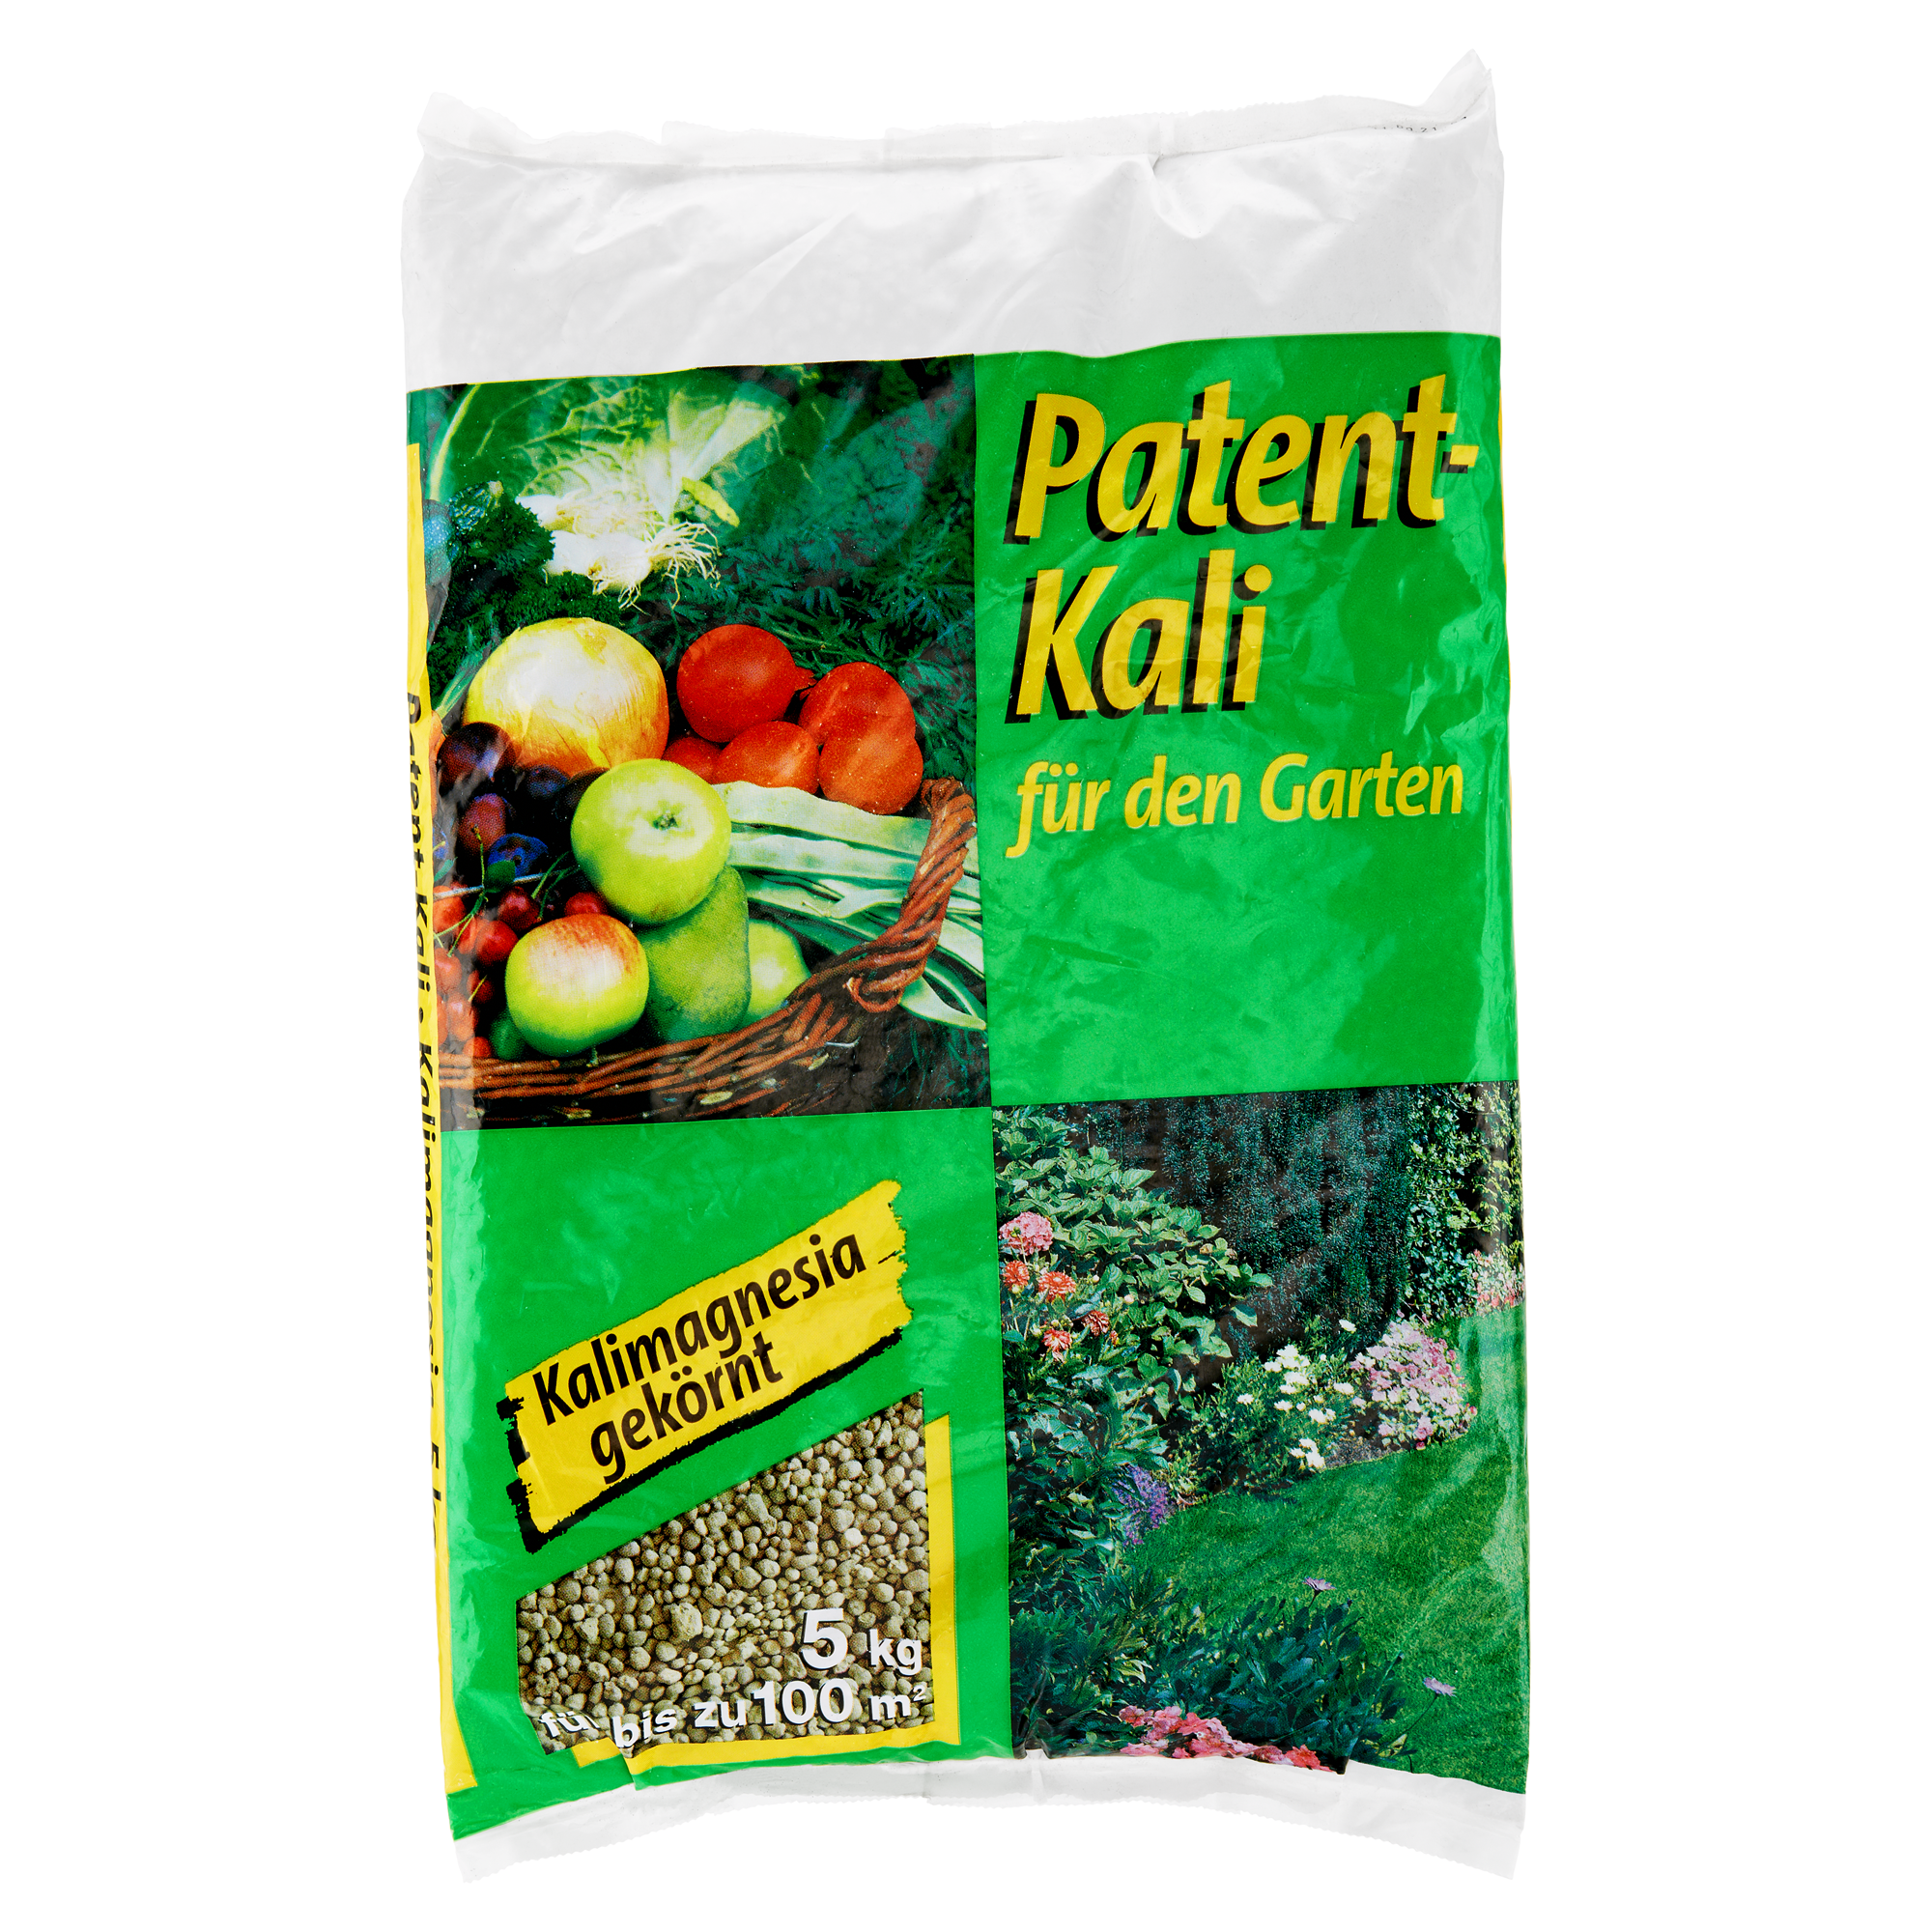 Patentkali 5 kg + product picture